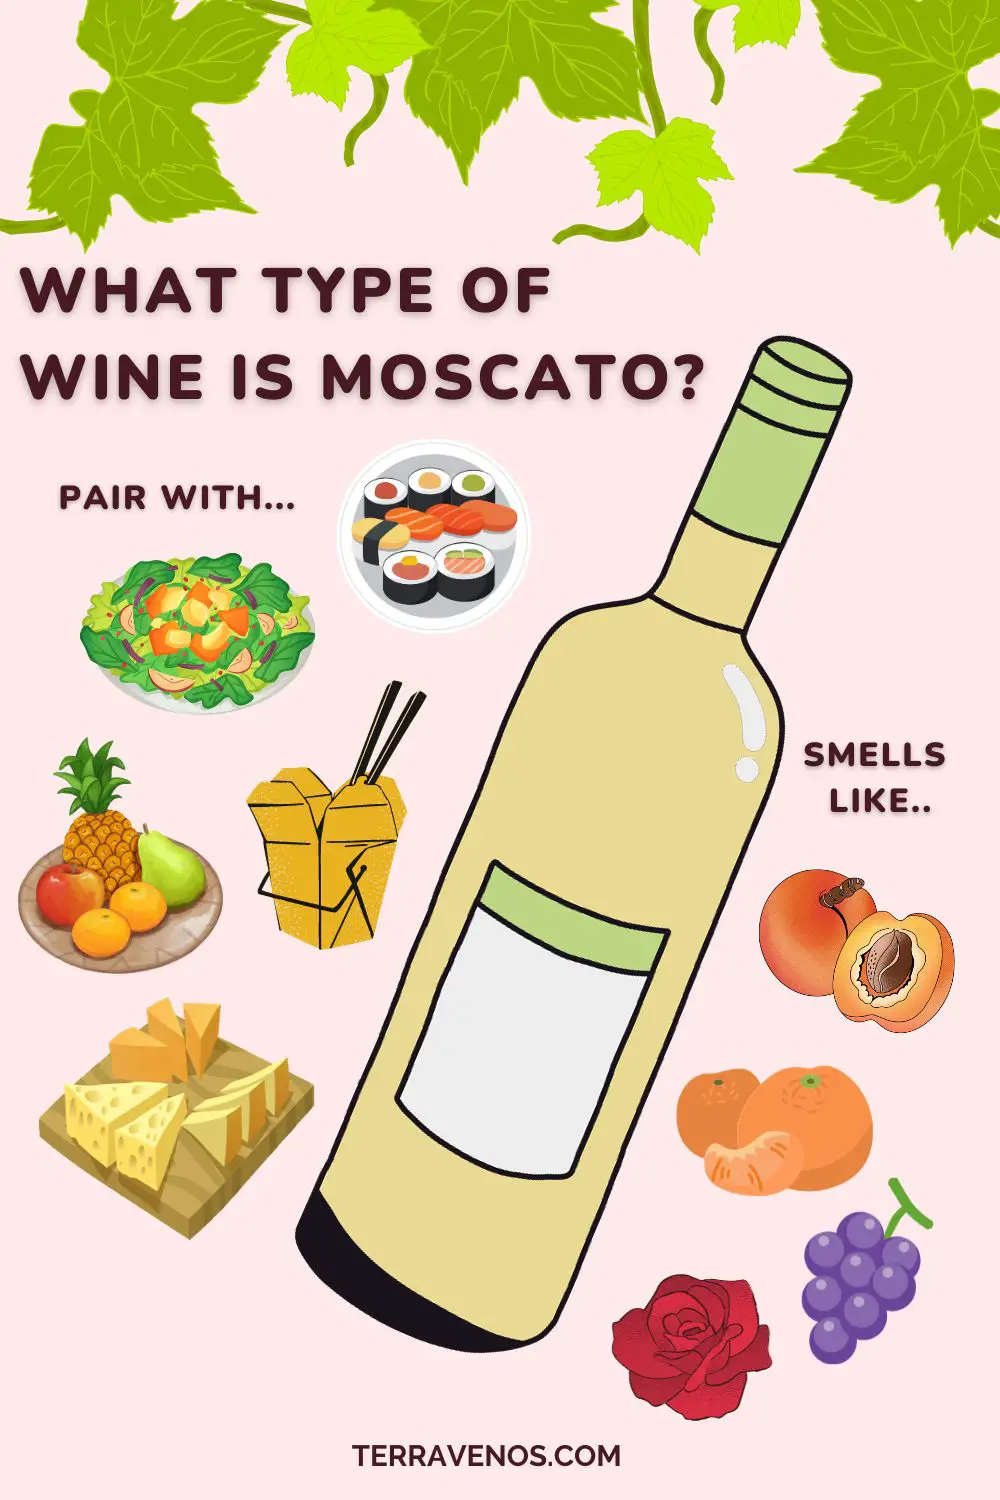 what type of wine is moscaot - moscato wine pairing and flavor infographic